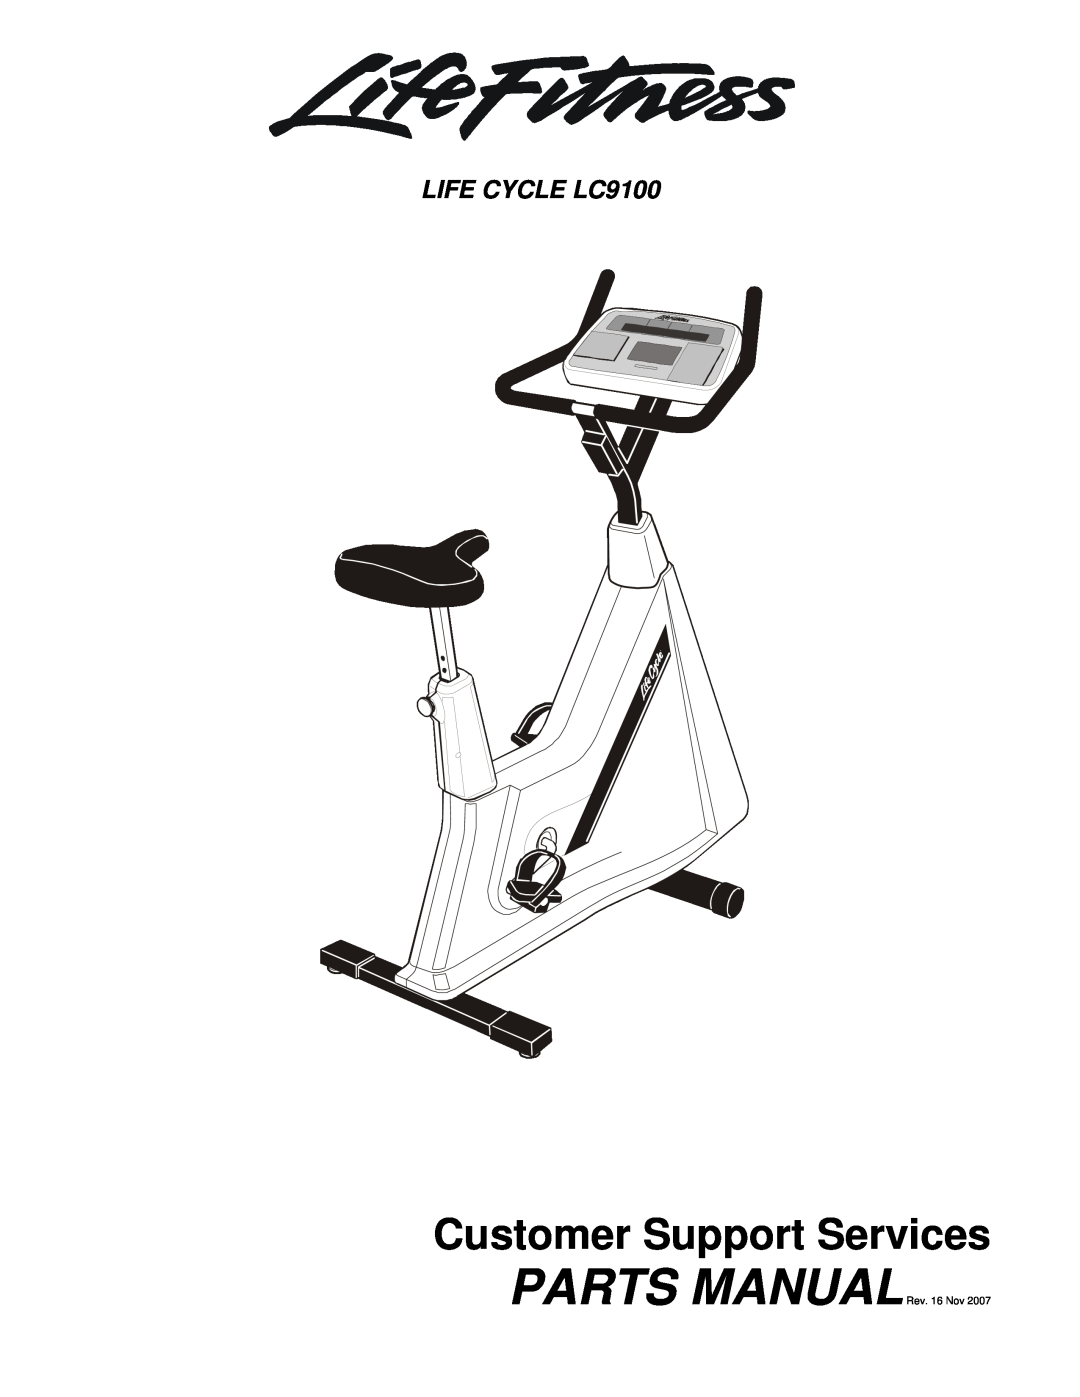 Life Fitness manual Customer Support Services, LIFE CYCLE LC9100, PARTS MANUALRev. 16 Nov 